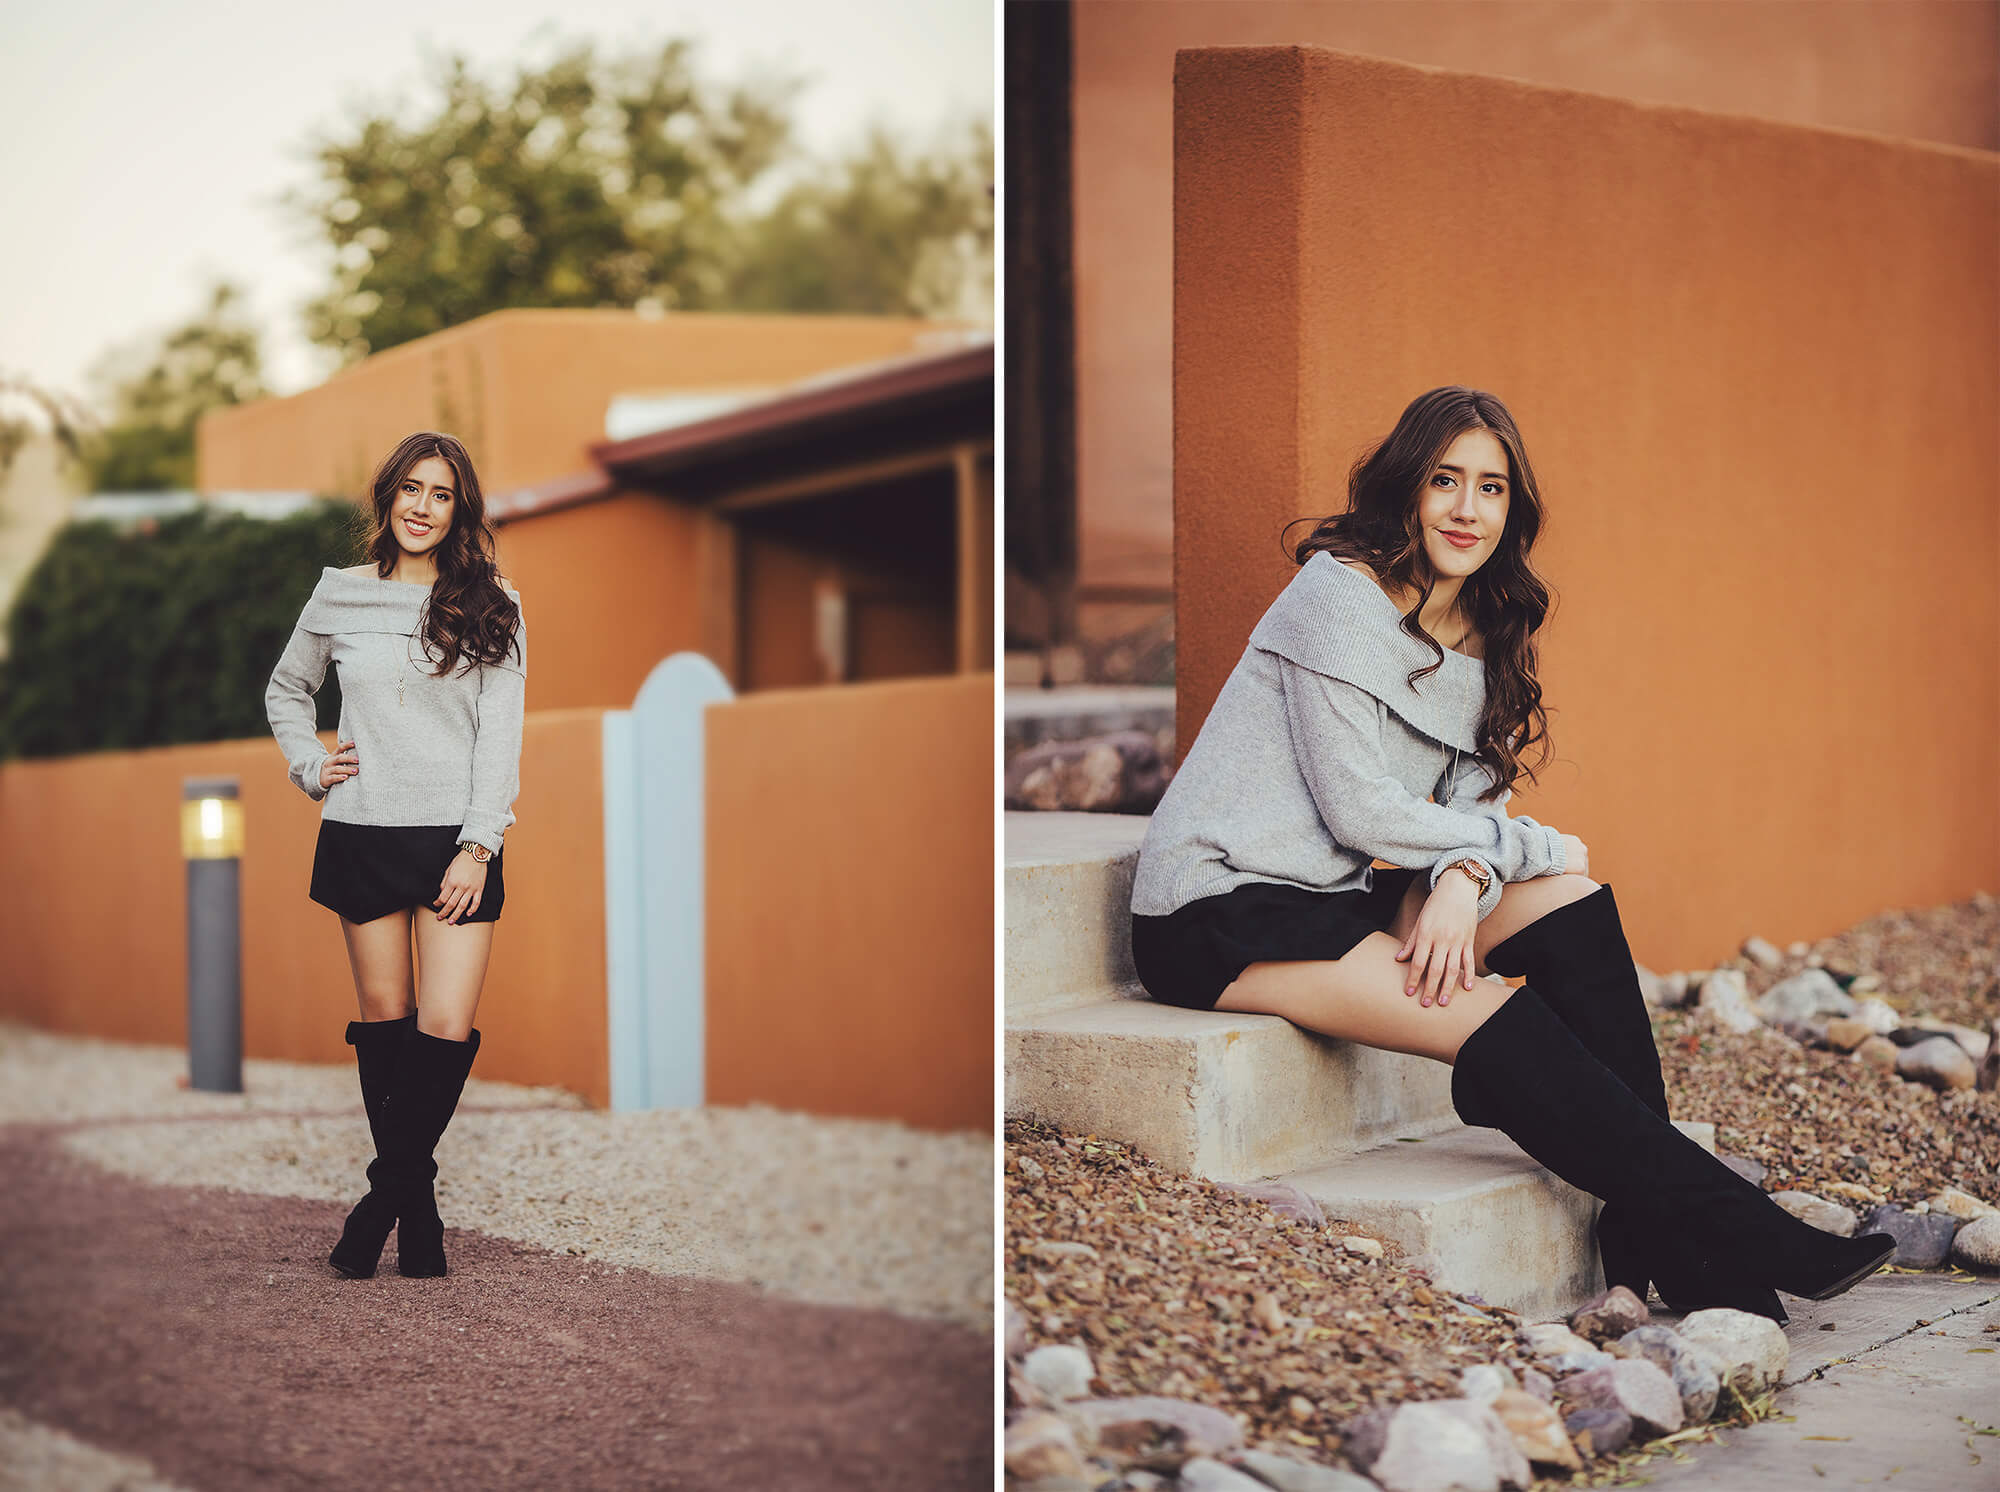 Cienega High School senior, Brianna, is a vision amongst the adobe-style homes that cover her Southwest home of Tucson during her senior photoshoot with Belle Vie Photography